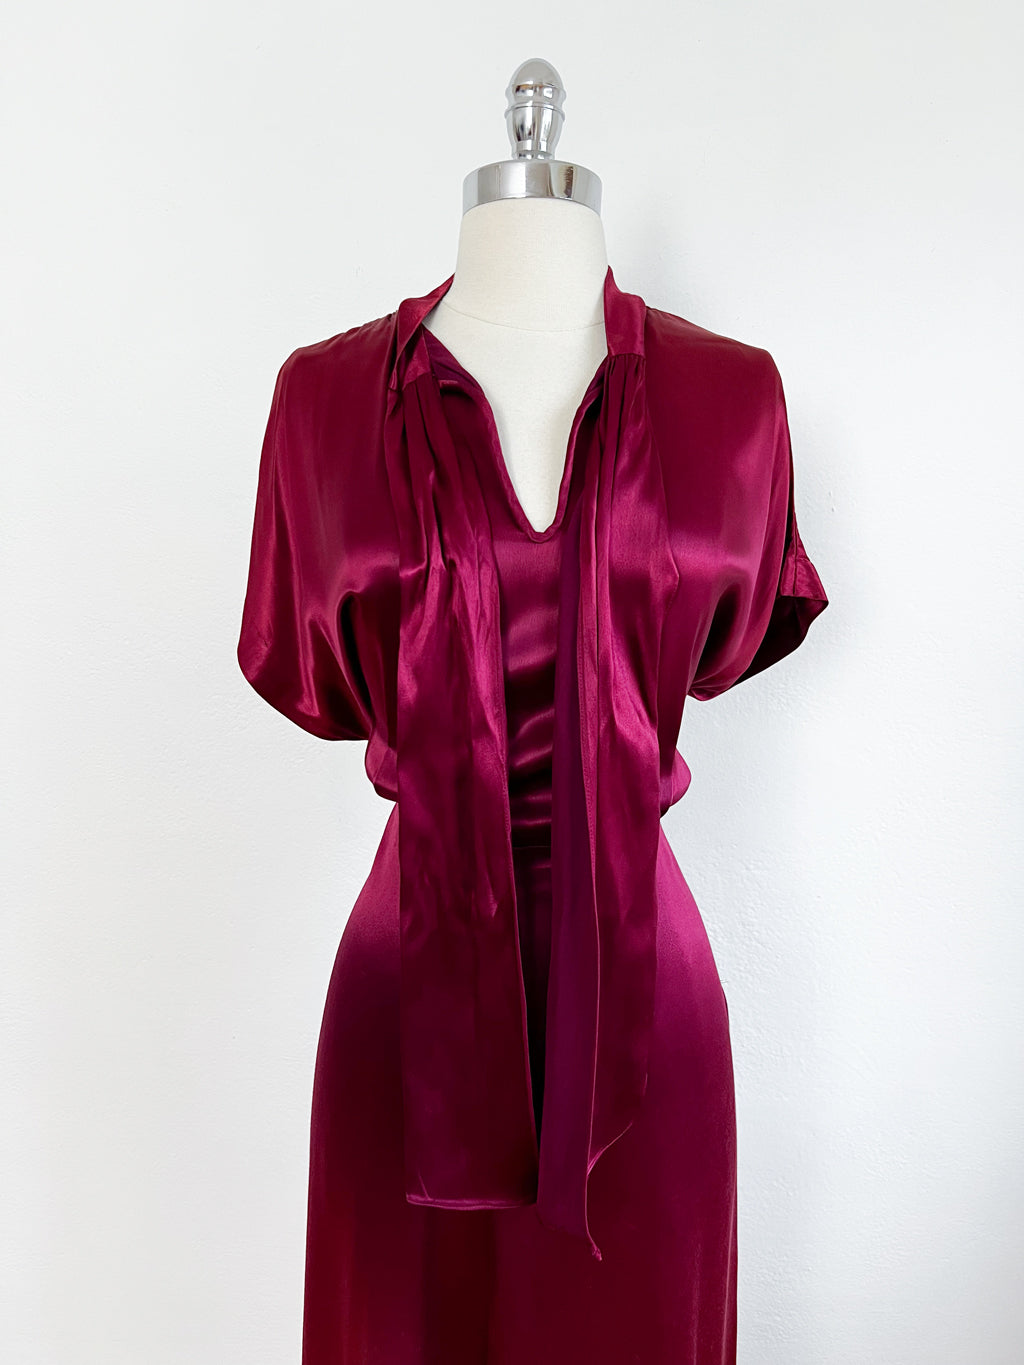 Vintage 1940s GLOSSY Satin Dress - Beautifully Shiny Claret-Colored Cocktail Stunner w Neck Sashes Size L - XL